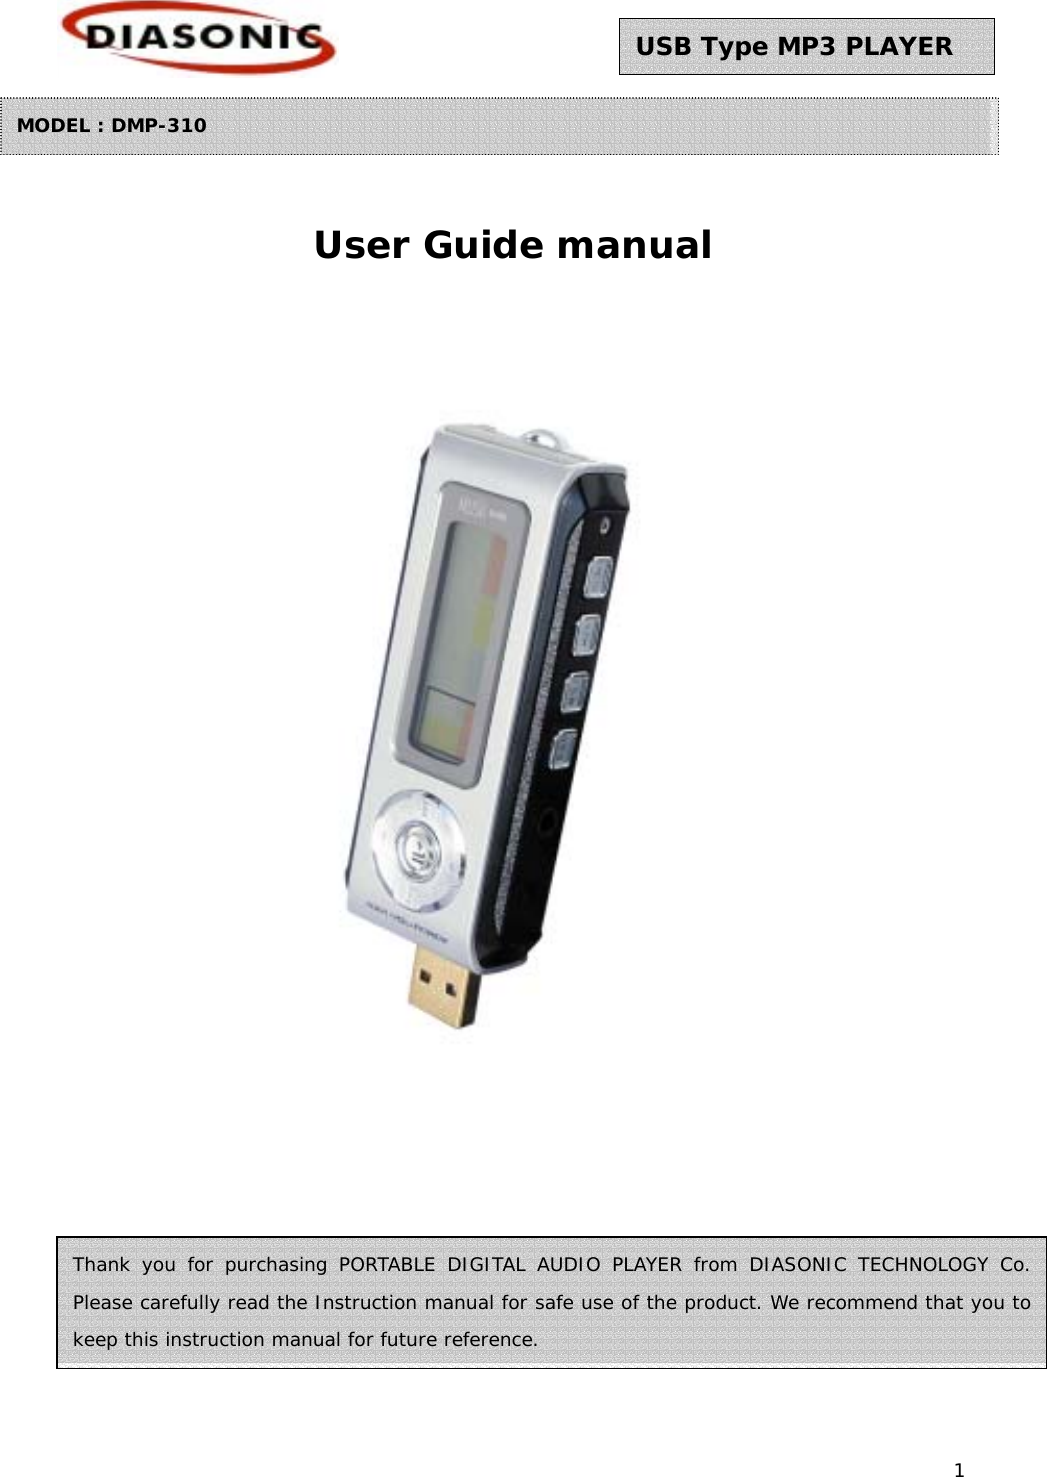 1 Thank you for purchasing PORTABLE DIGITAL AUDIO PLAYER from DIASONIC TECHNOLOGY Co. Please carefully read the Instruction manual for safe use of the product. We recommend that you to keep this instruction manual for future reference.       User Guide manual          USB Type MP3 PLAYER MODEL : DMP-310 